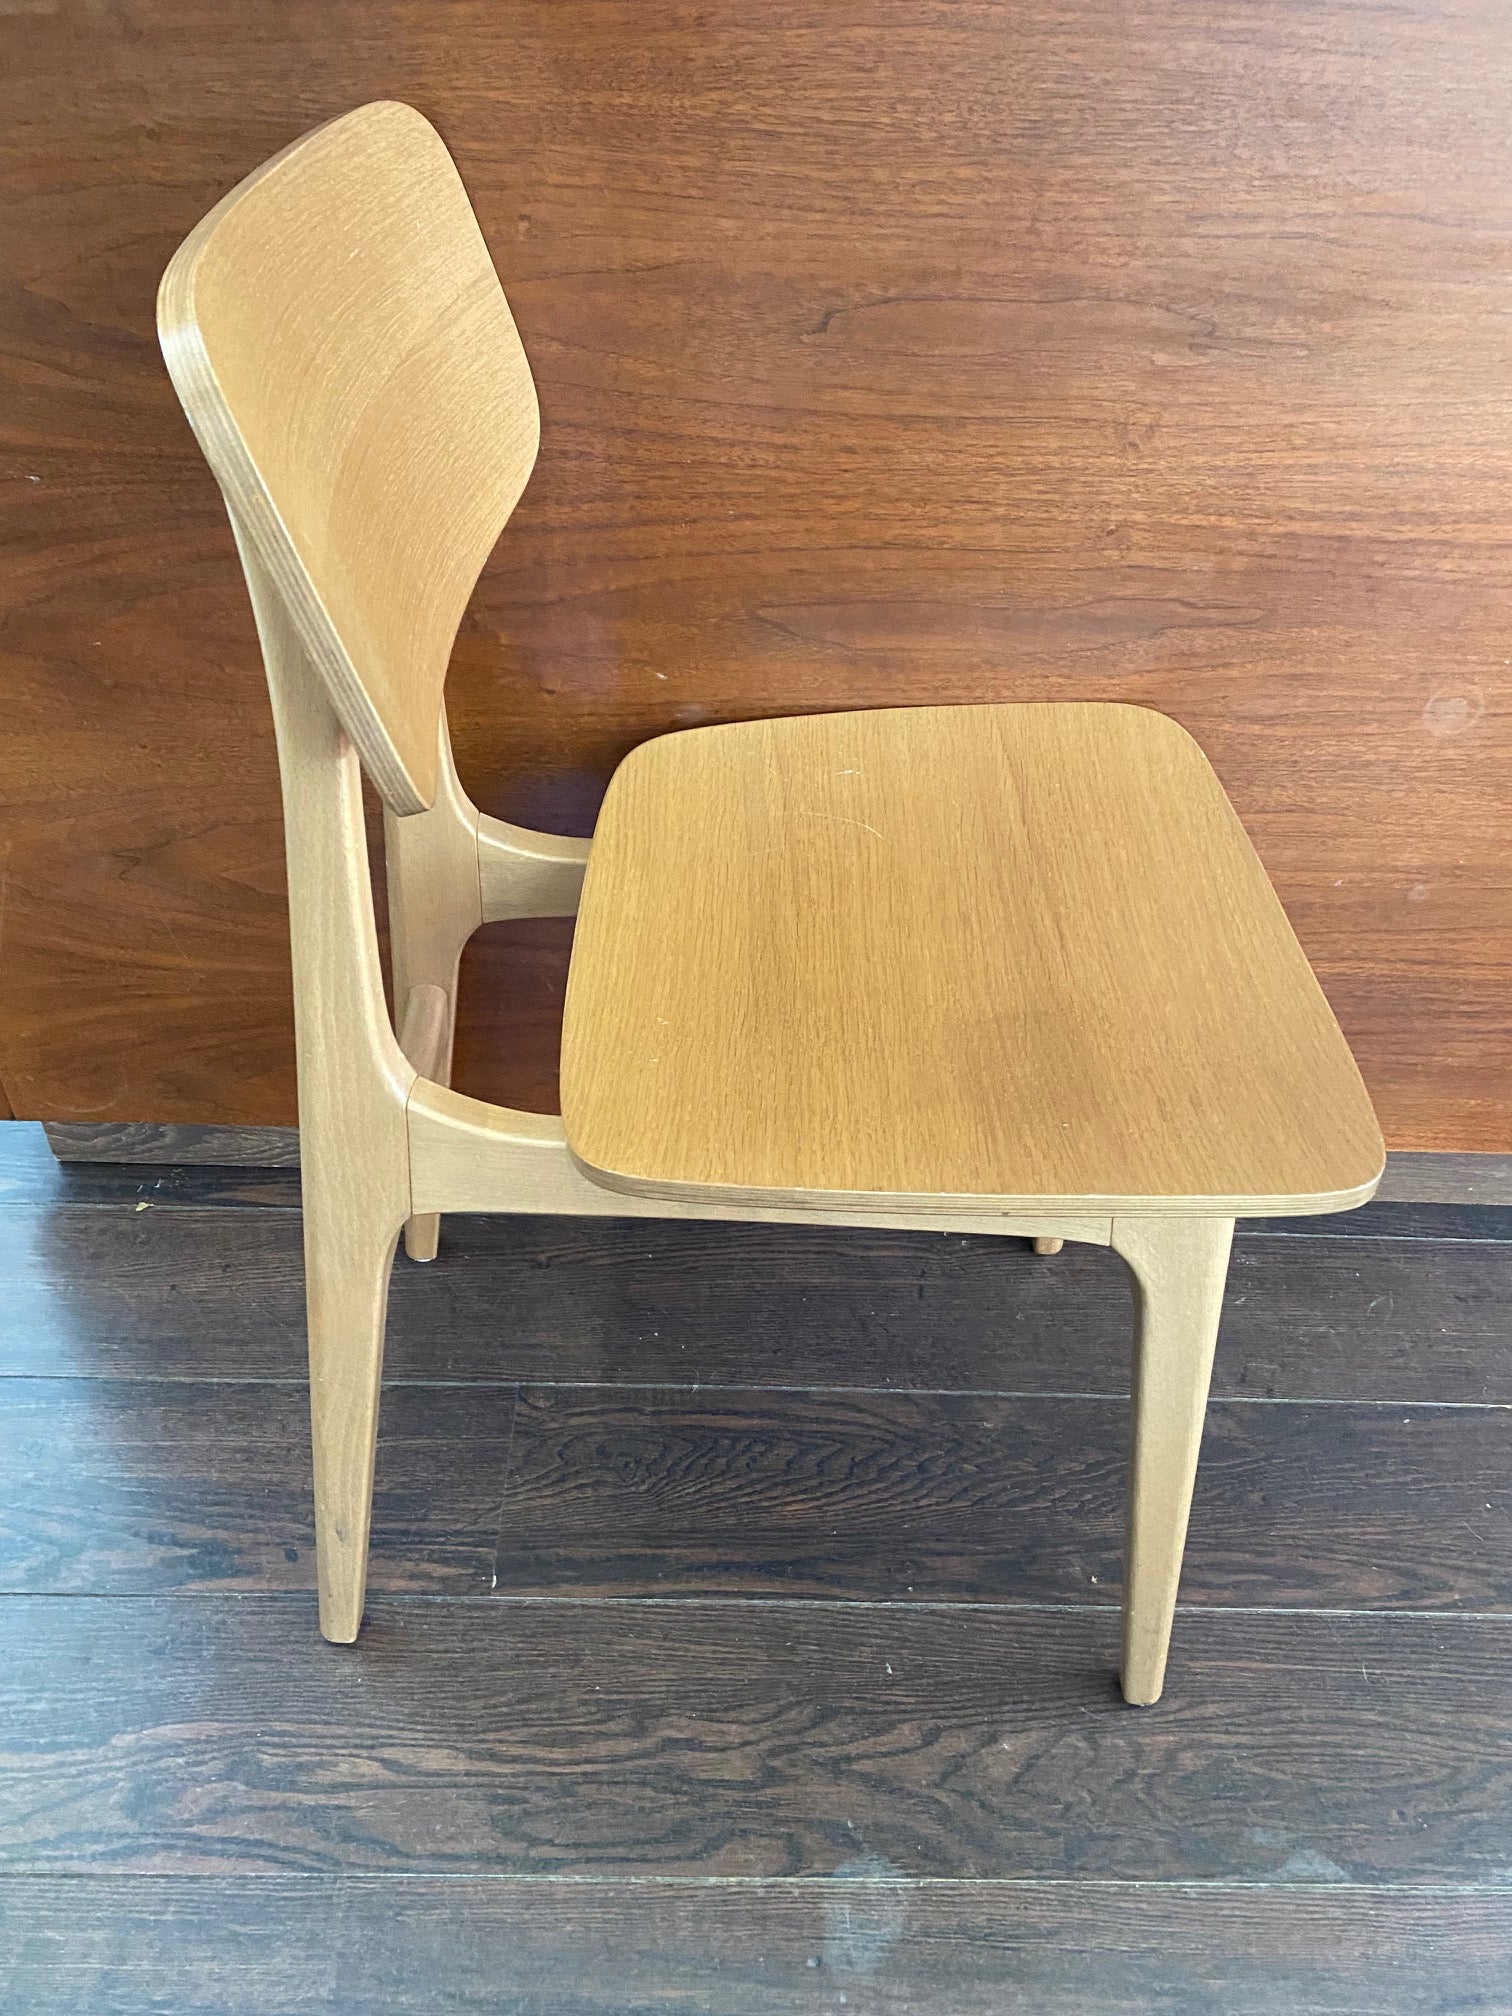 Beautiful mix of classic mid century with a contemporary design oak chair. Made in Italy. - Cook Street Vintage